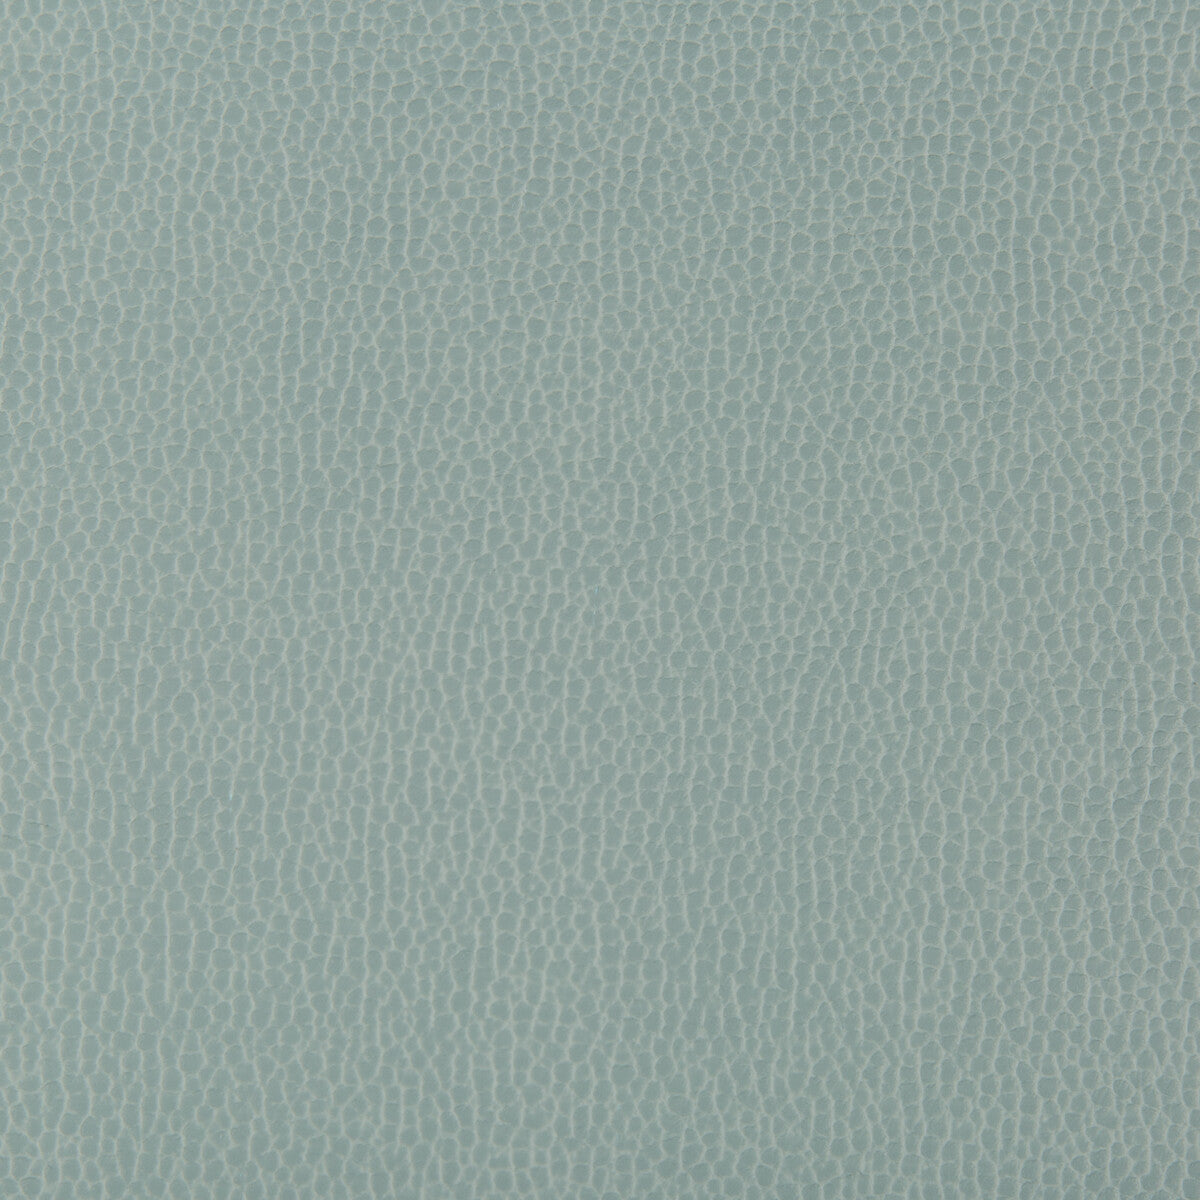 Lenox fabric in mystic color - pattern LENOX.135.0 - by Kravet Contract